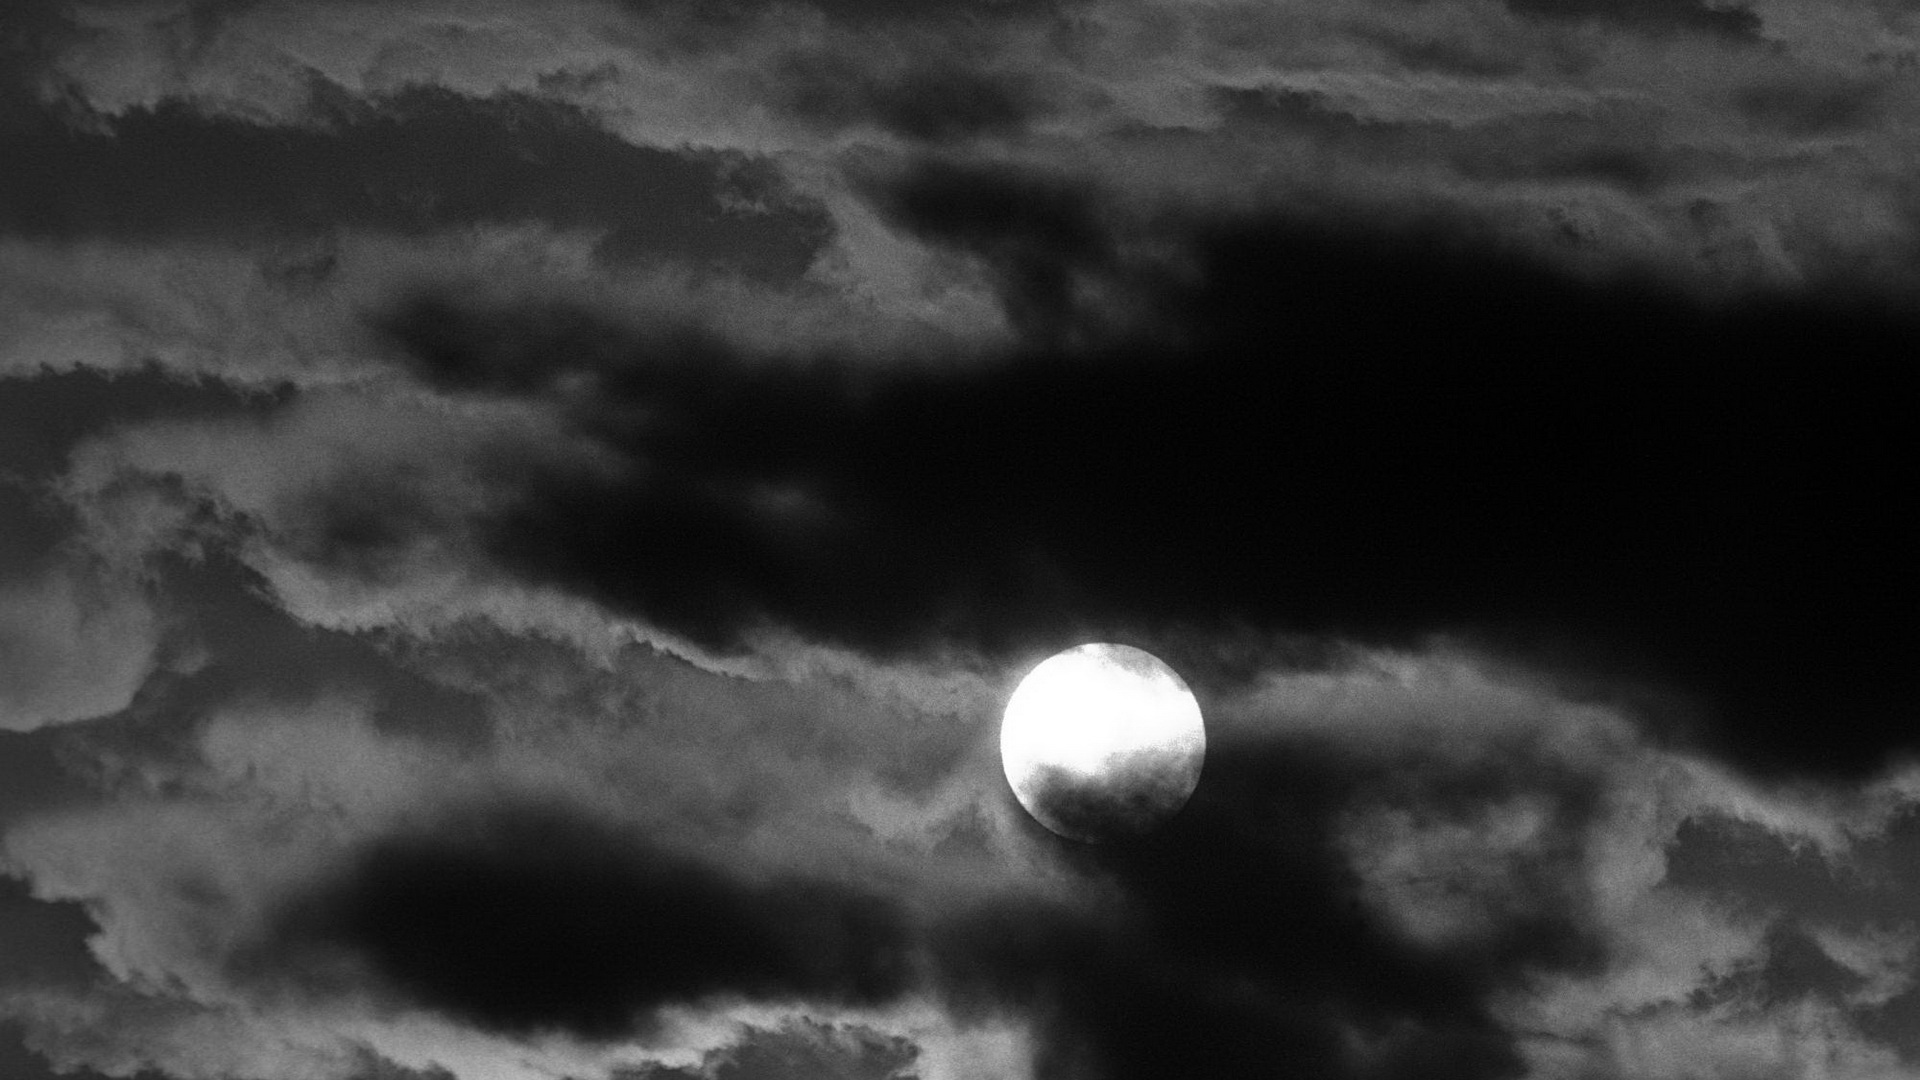 Free Download Natural Scenery Picture - The Round Moon in the Middle of the Sky, Surrounded by Dark Clouds, What Happened? 1920X1080 free wallpaper download